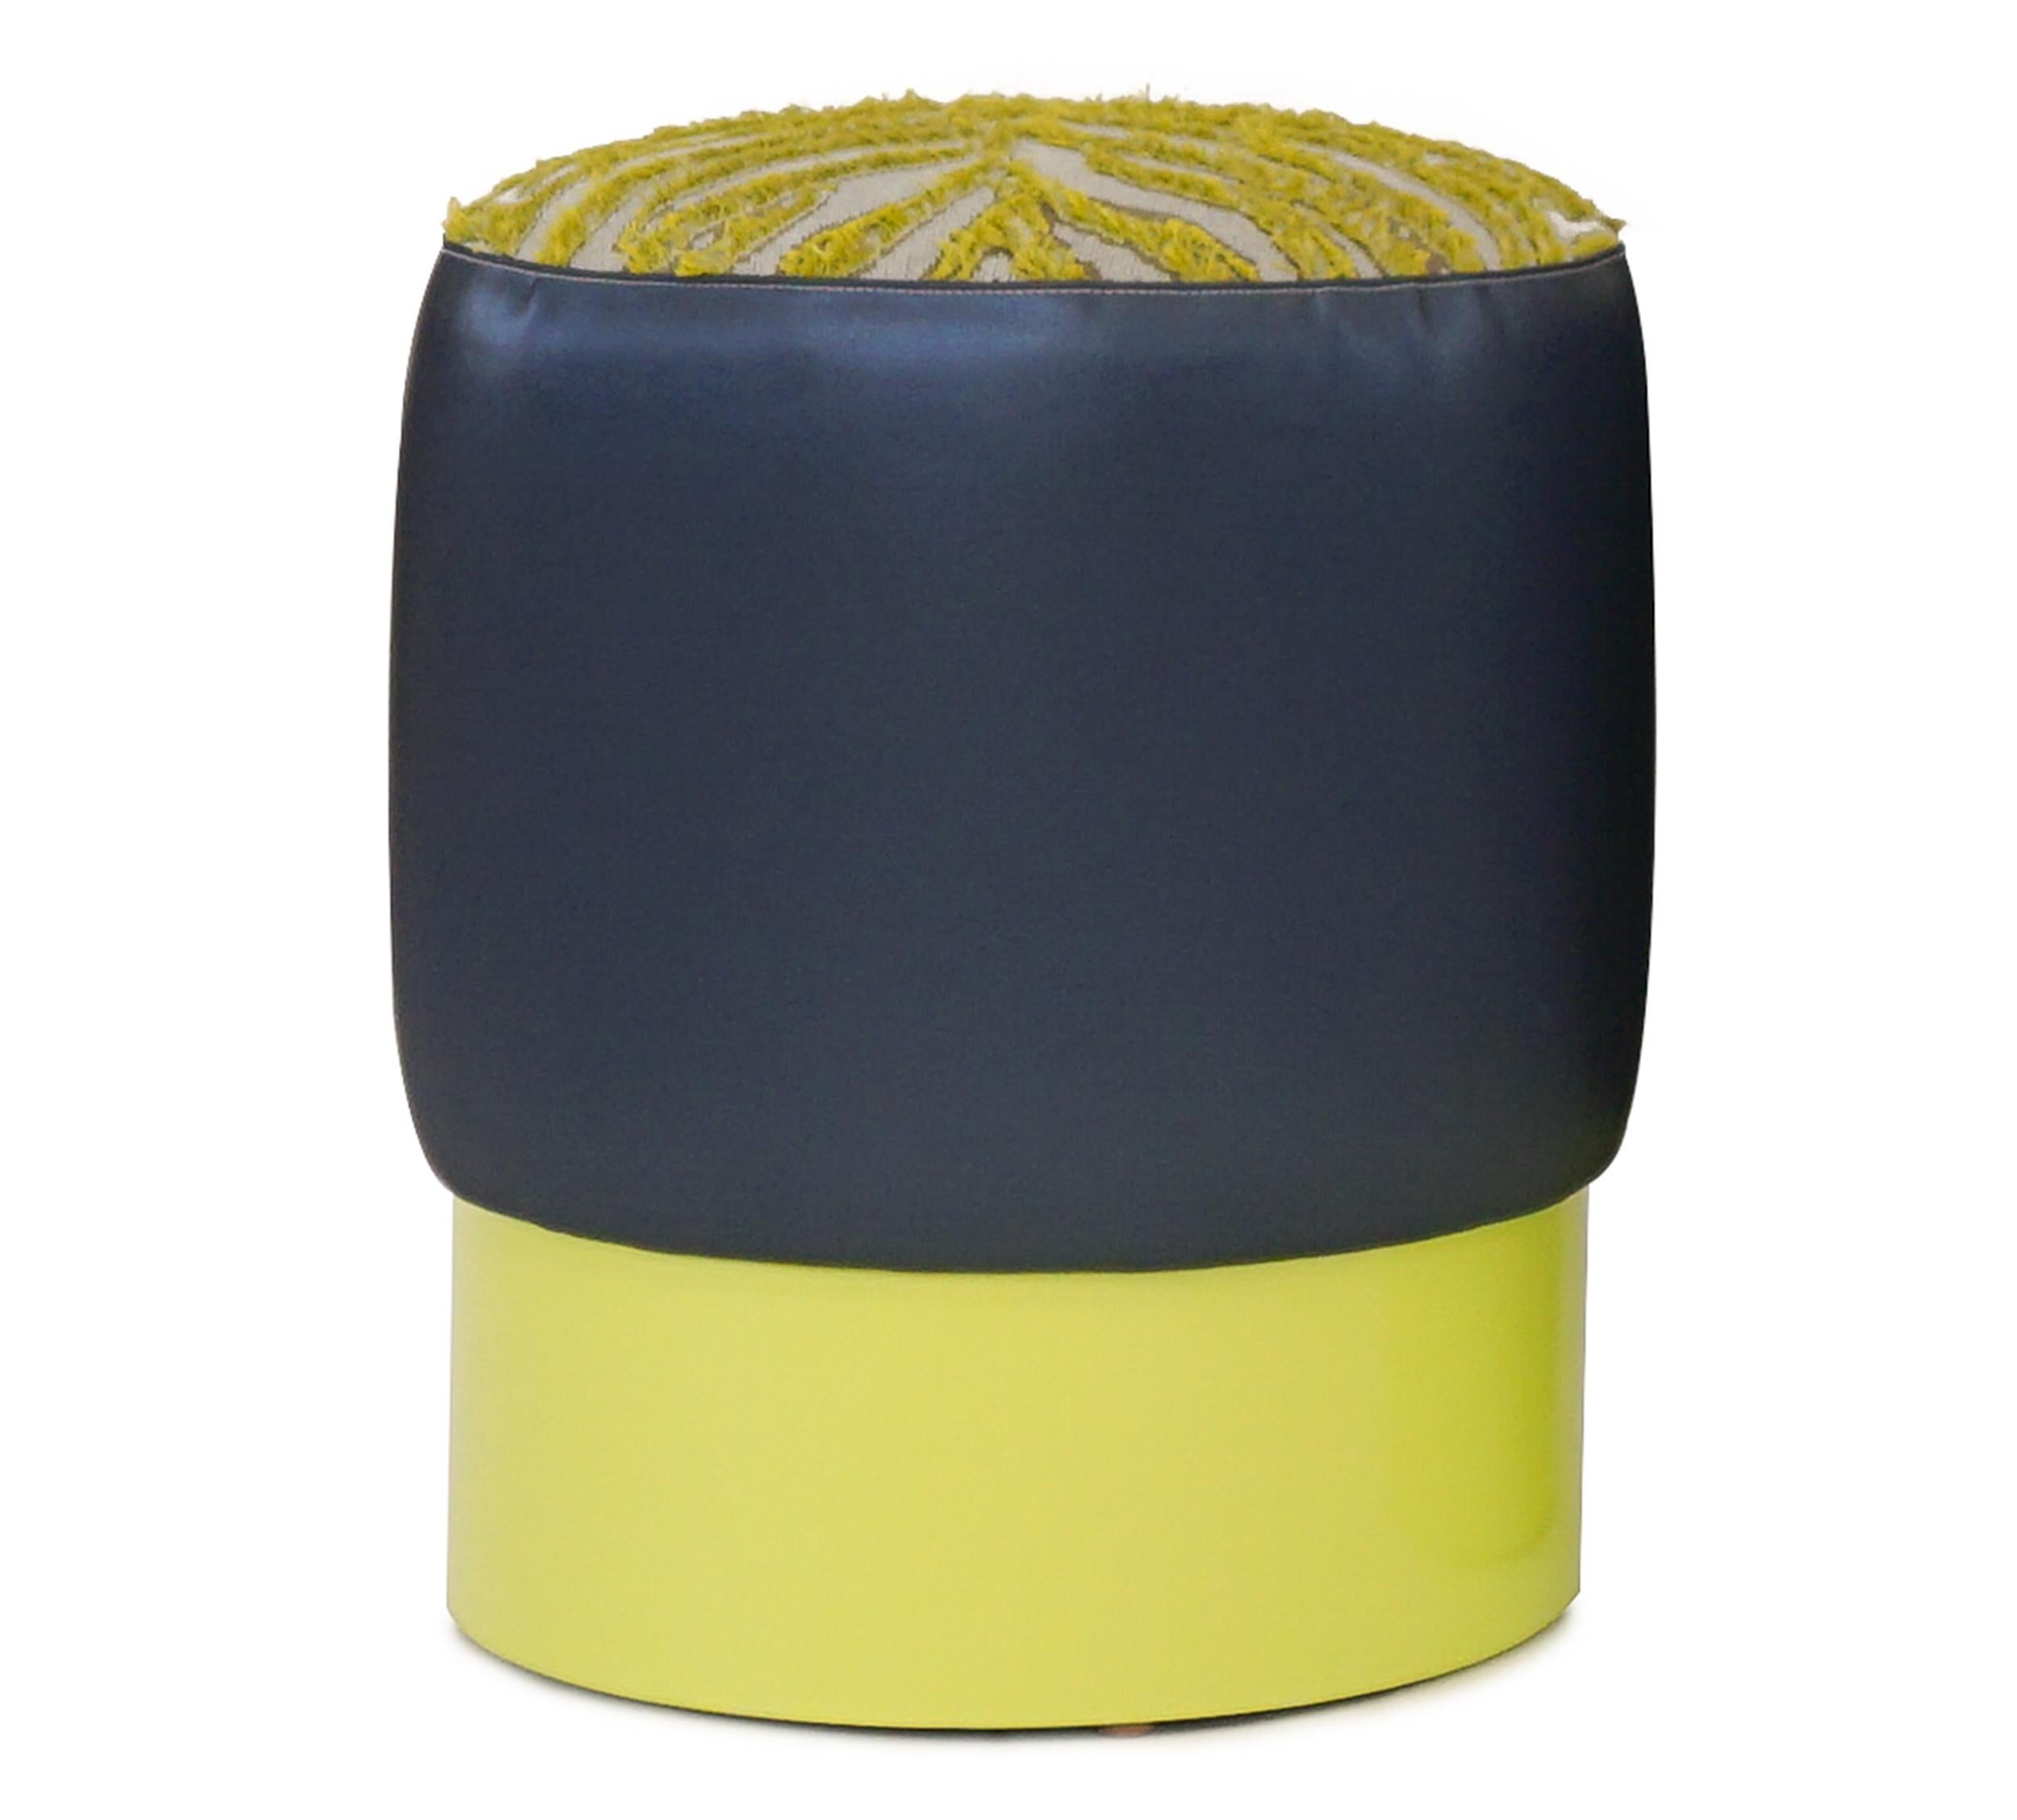 About this piece
Small round ottoman with a firm but cushioned seat. Well sized occasional seating, stores easily beneath console tables, easy to lift or slide. Vinyl has a pearlized finish and gives a subtle sheen an comes in dozens of colors.